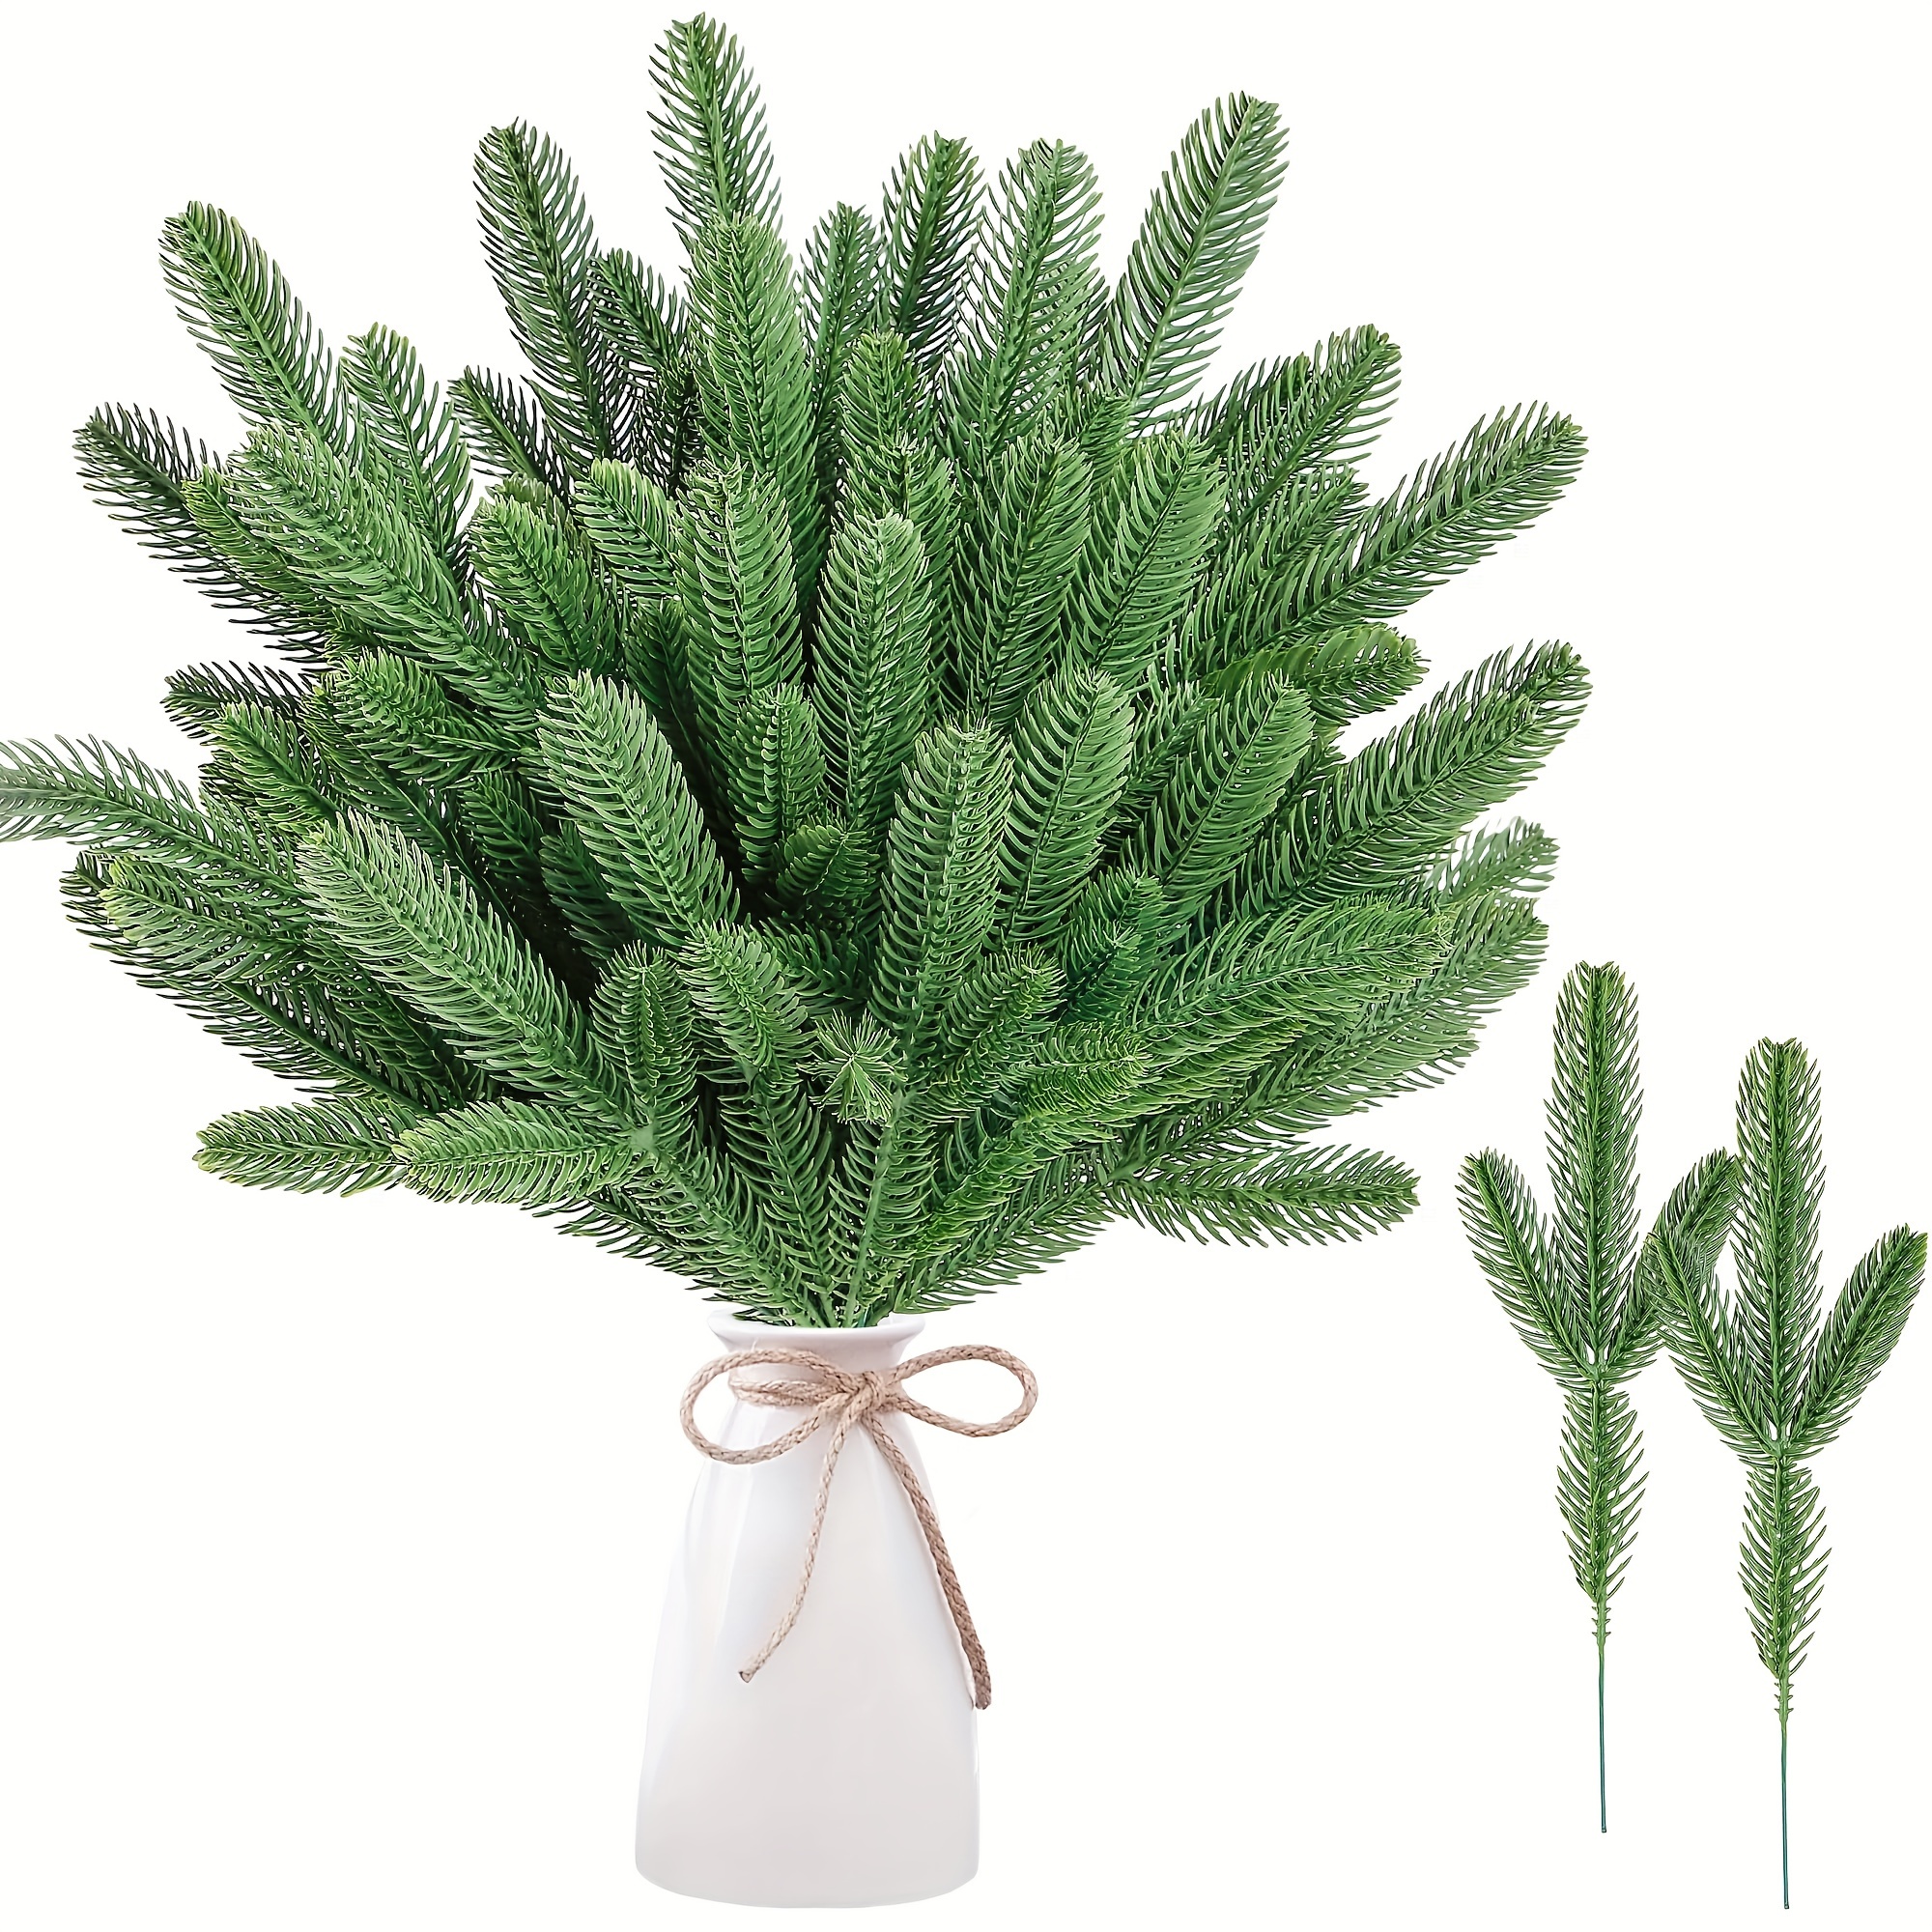 Decorative Flowers Artificial Pine Branches Set Of 5 Tree Branch Props  Ornament Accessory Drop Ship From Aveapt2621, $8.65